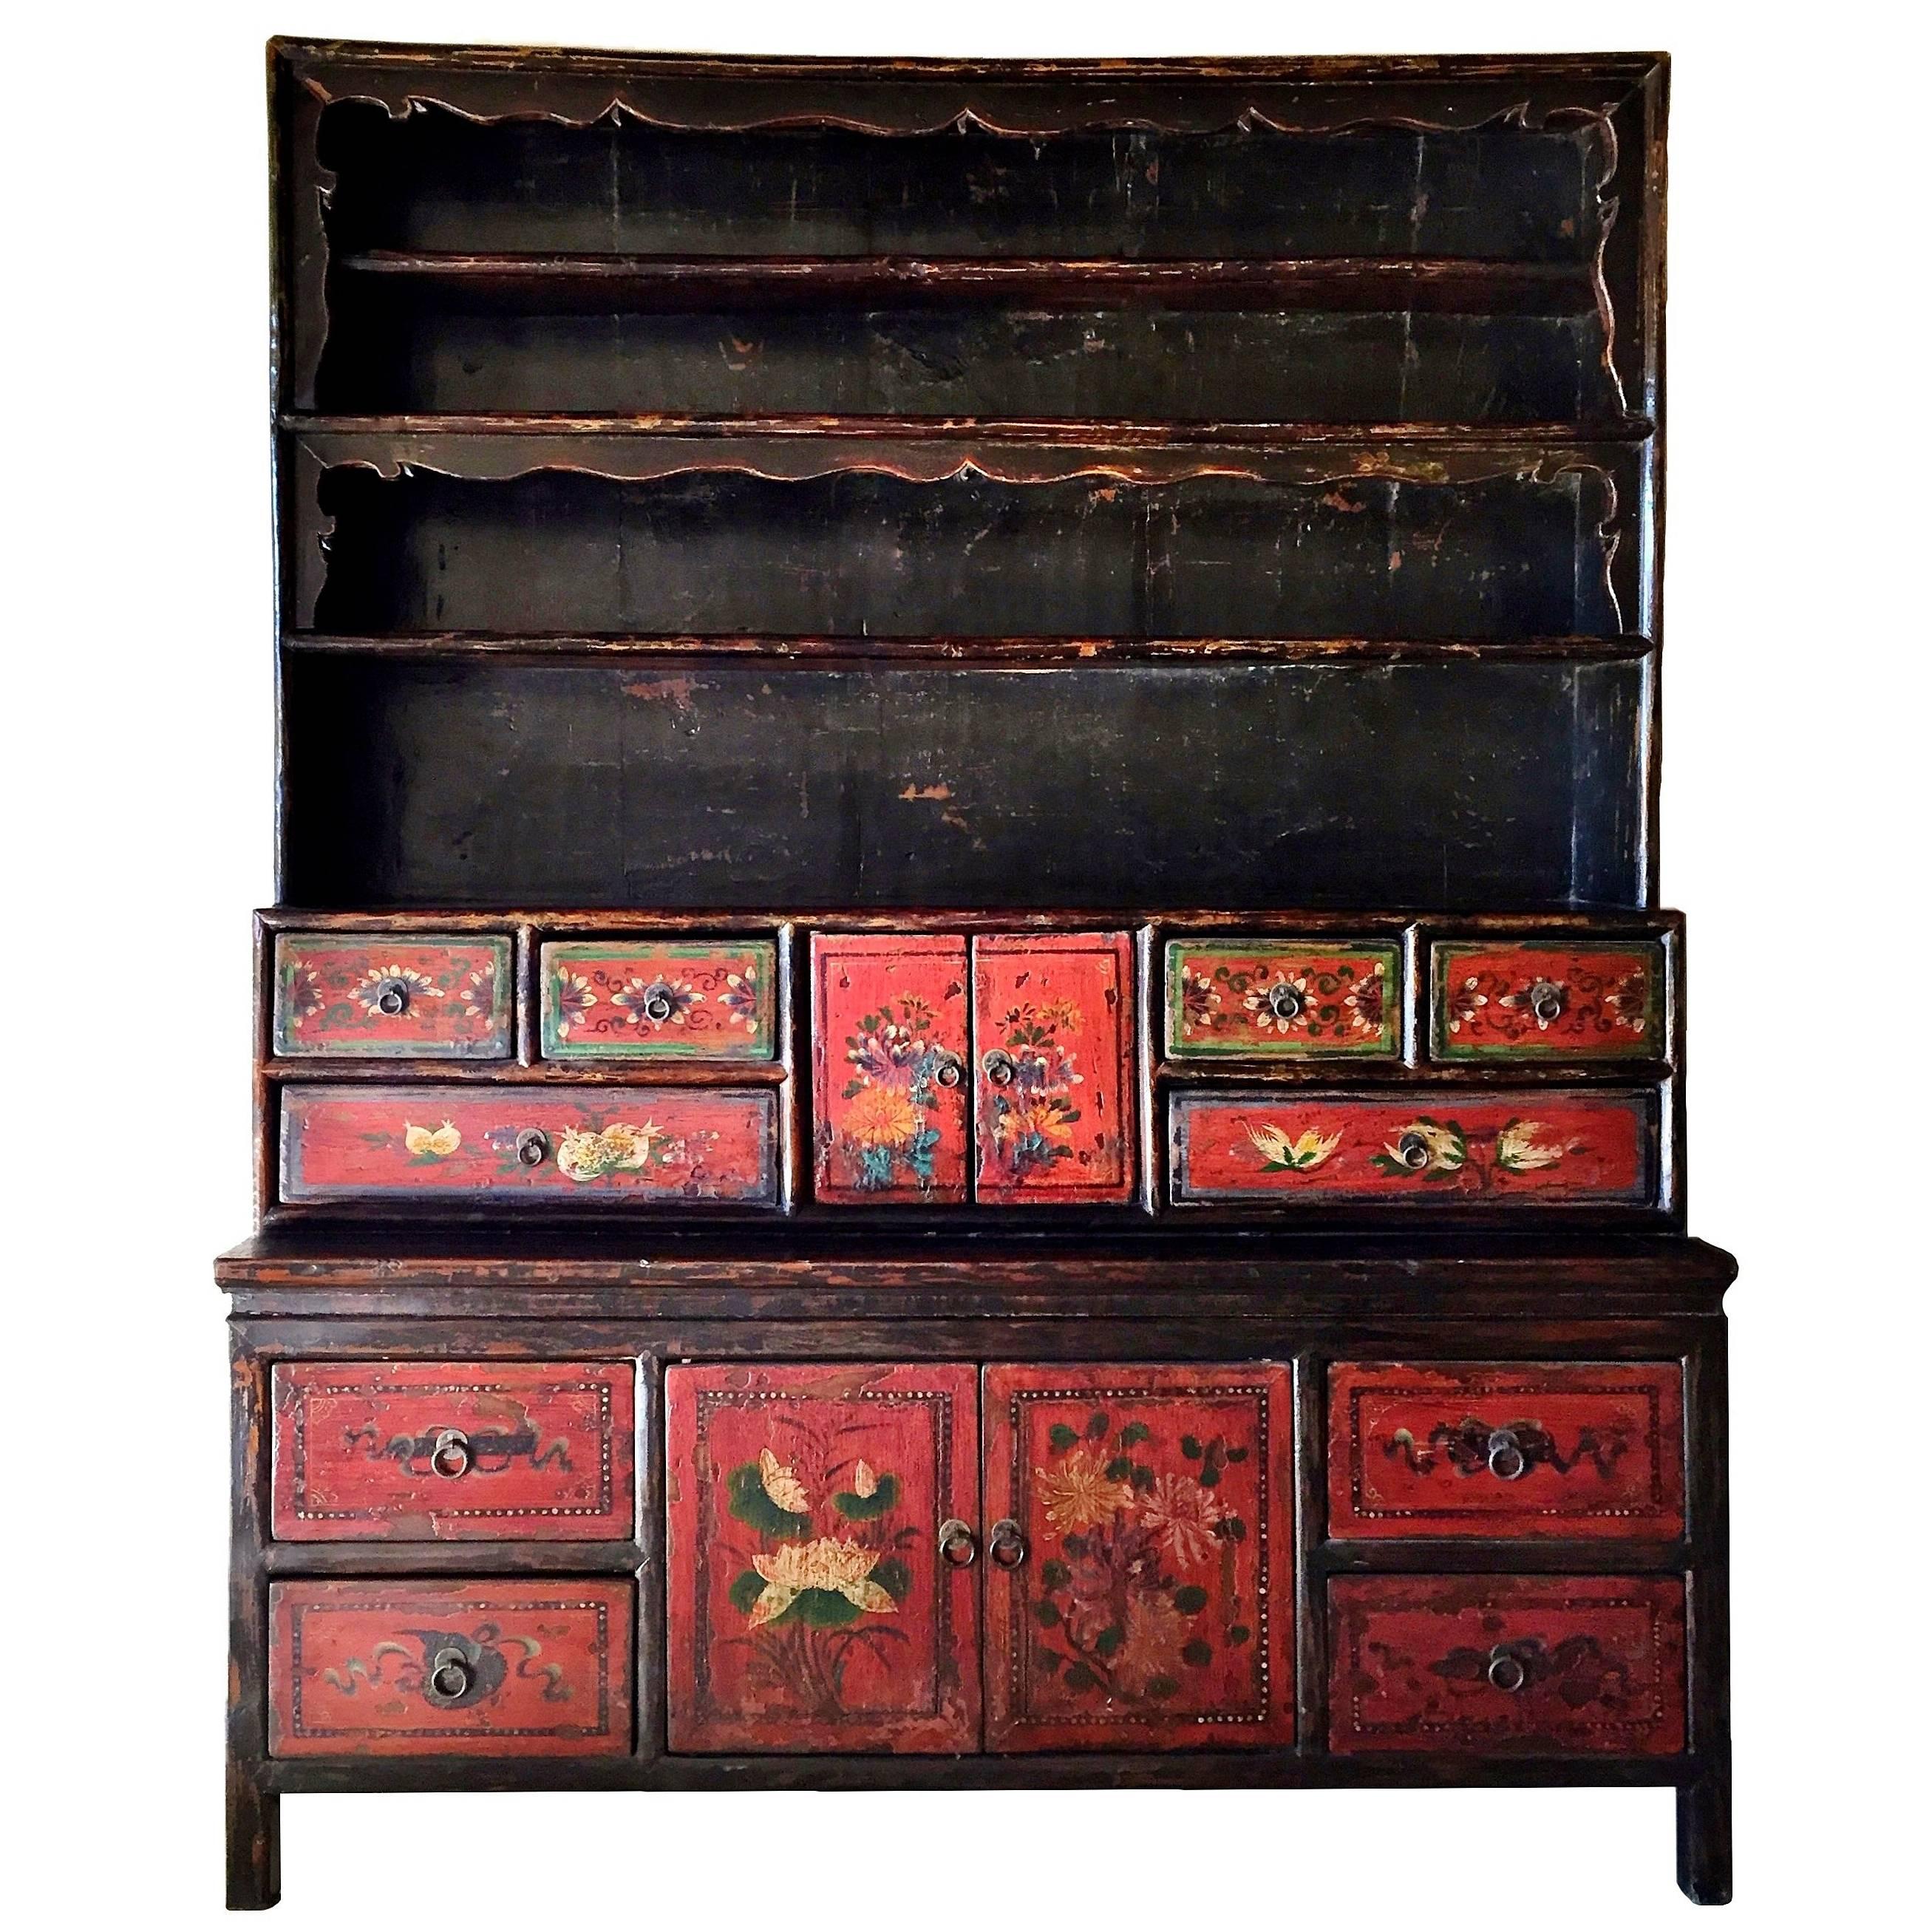 Antique Tibetan Cupboard, Hand-Painted Chest, Large, 19th Century